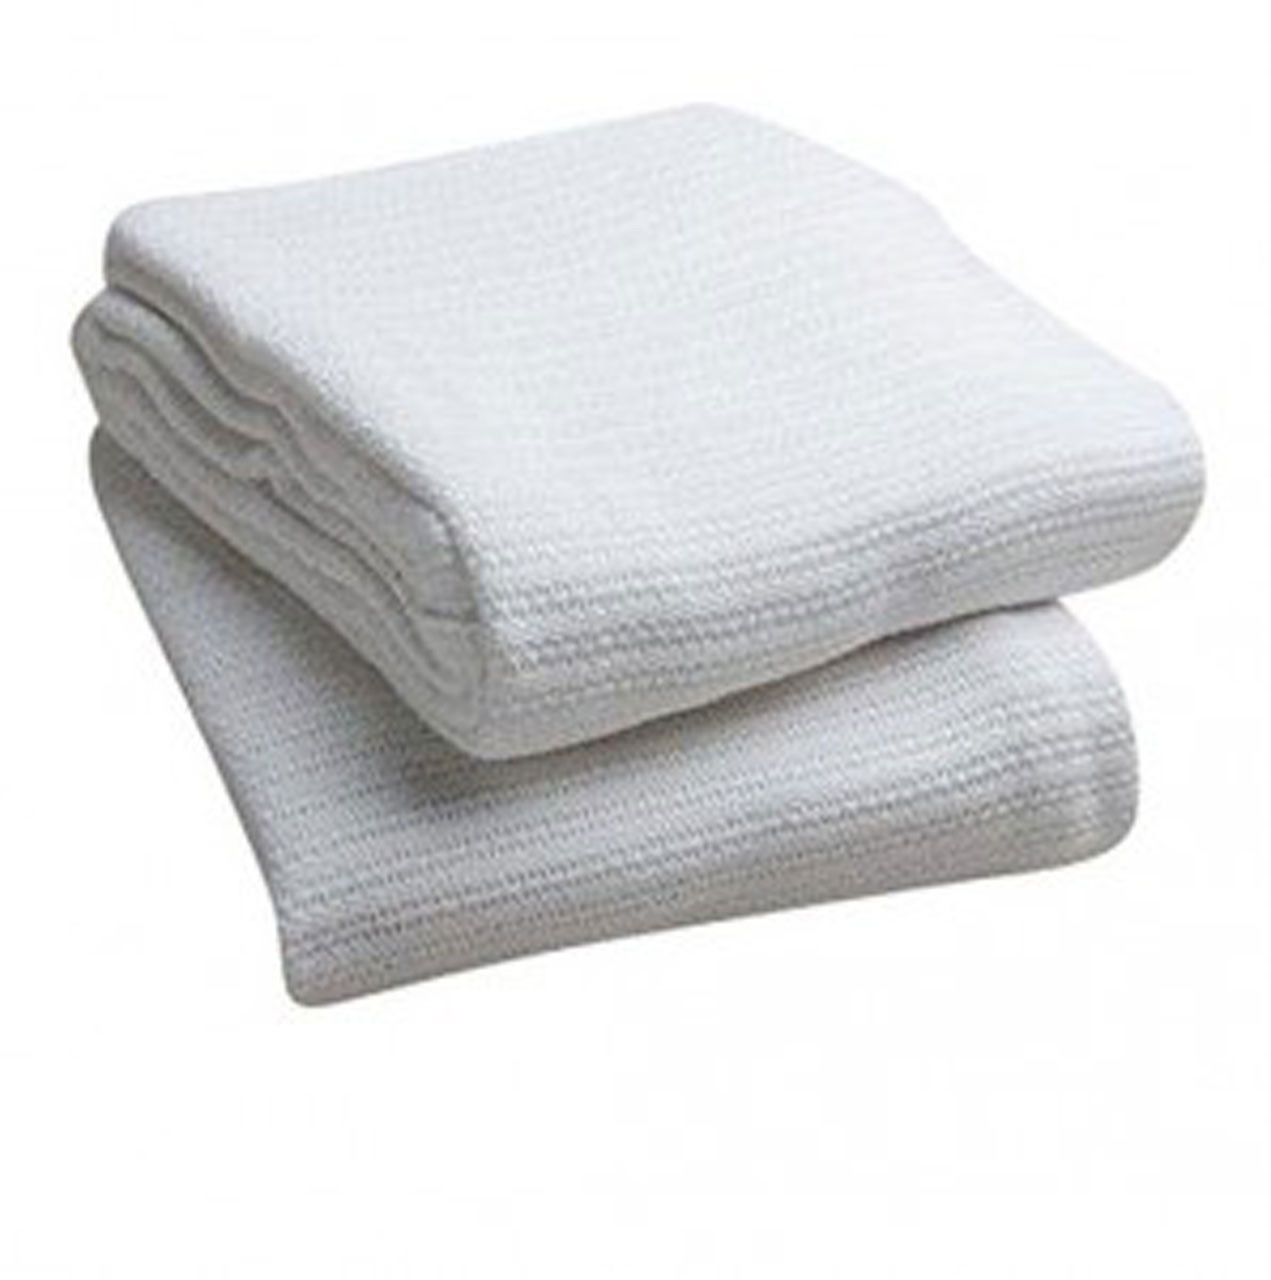 In what settings can the open weave blanket be utilized?